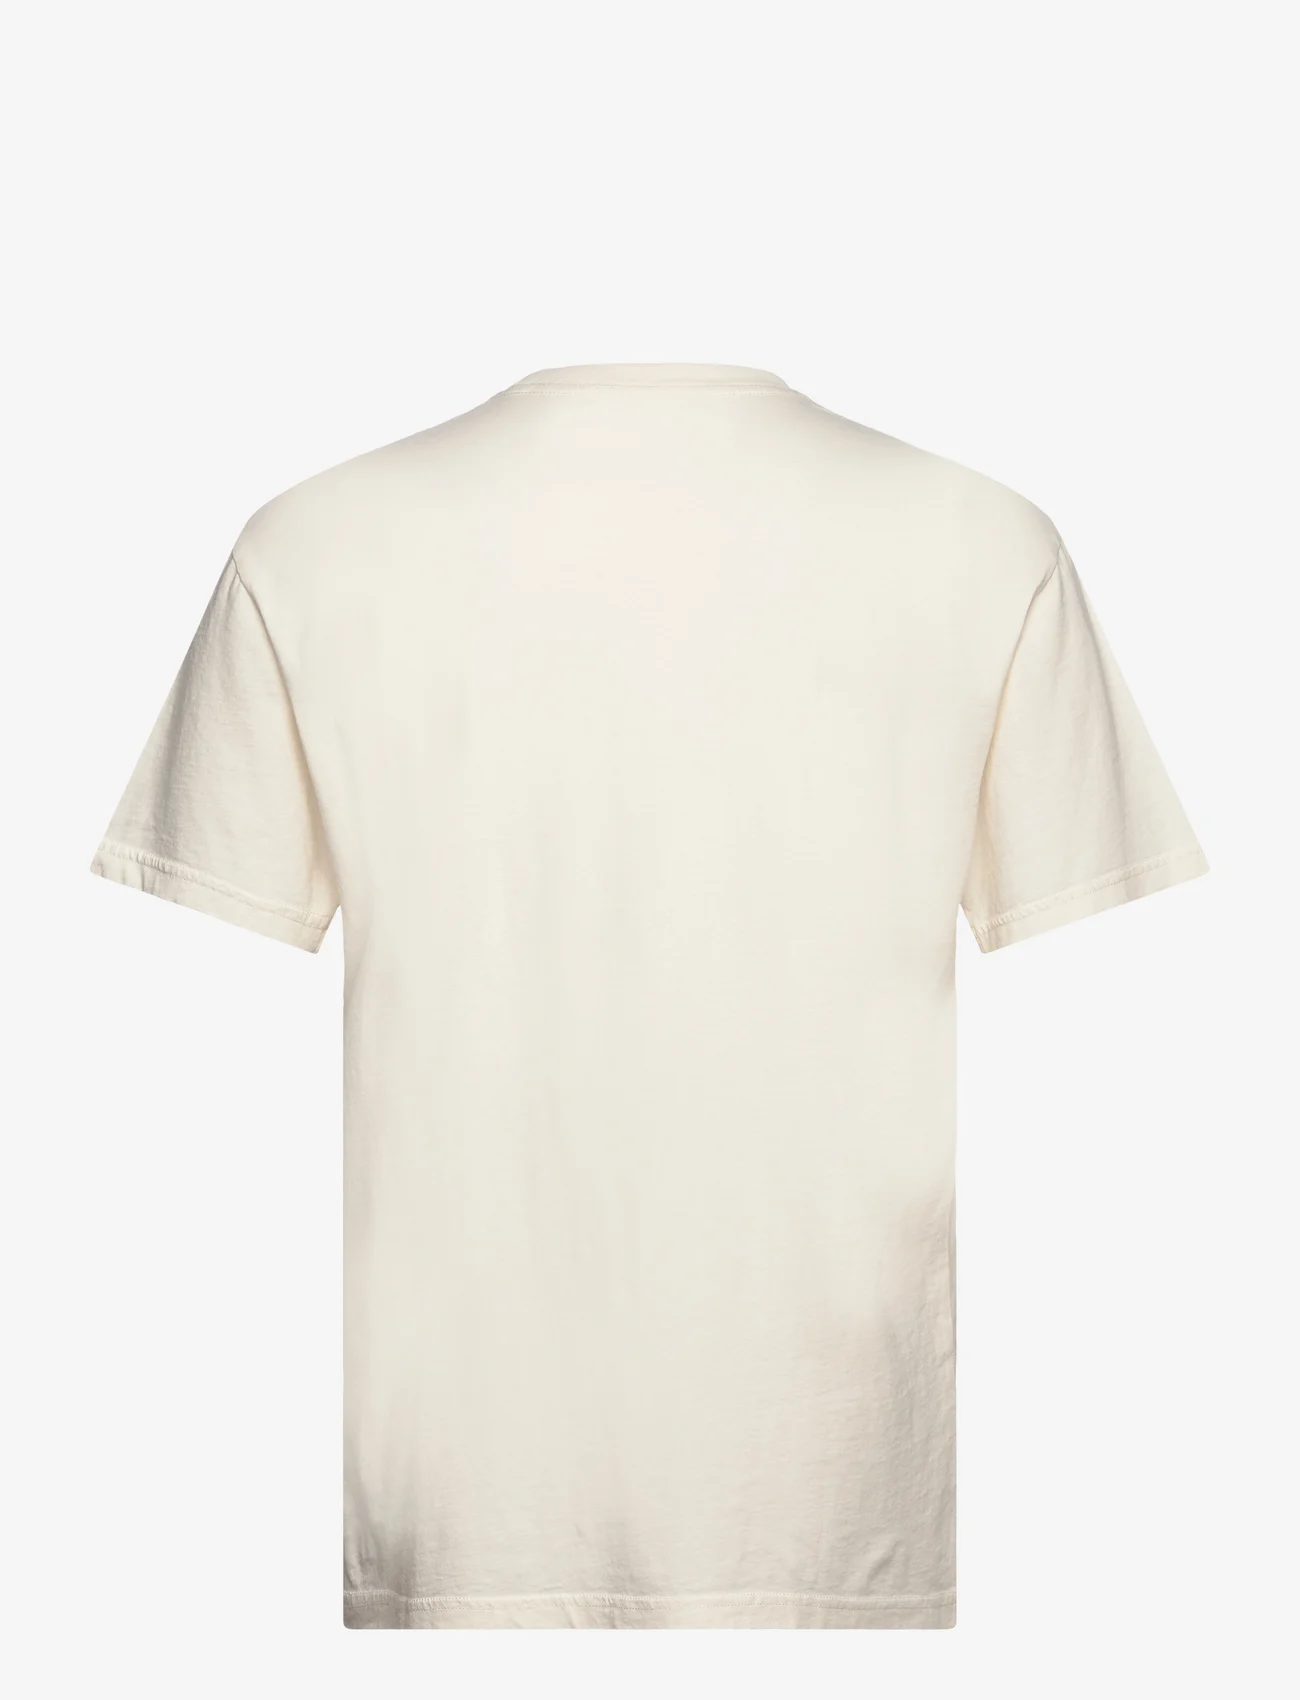 Revolution - Loose t-shirt - lowest prices - offwhite - 1